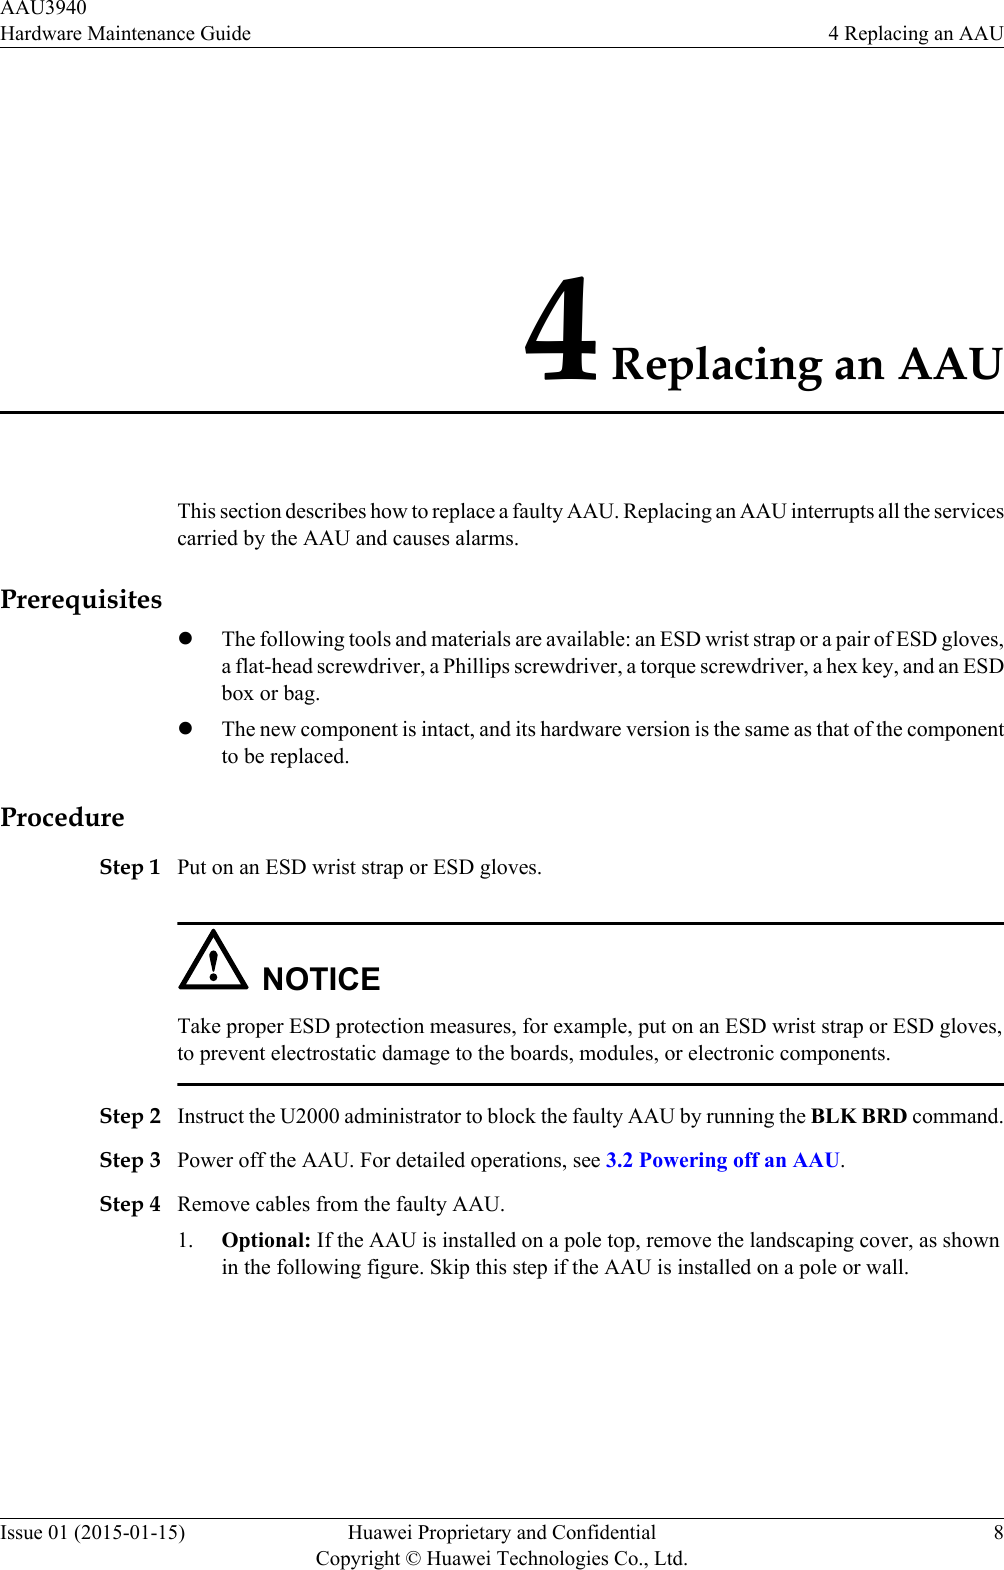 4 Replacing an AAUThis section describes how to replace a faulty AAU. Replacing an AAU interrupts all the servicescarried by the AAU and causes alarms.PrerequisiteslThe following tools and materials are available: an ESD wrist strap or a pair of ESD gloves,a flat-head screwdriver, a Phillips screwdriver, a torque screwdriver, a hex key, and an ESDbox or bag.lThe new component is intact, and its hardware version is the same as that of the componentto be replaced.ProcedureStep 1 Put on an ESD wrist strap or ESD gloves.NOTICETake proper ESD protection measures, for example, put on an ESD wrist strap or ESD gloves,to prevent electrostatic damage to the boards, modules, or electronic components.Step 2 Instruct the U2000 administrator to block the faulty AAU by running the BLK BRD command.Step 3 Power off the AAU. For detailed operations, see 3.2 Powering off an AAU.Step 4 Remove cables from the faulty AAU.1. Optional: If the AAU is installed on a pole top, remove the landscaping cover, as shownin the following figure. Skip this step if the AAU is installed on a pole or wall.AAU3940Hardware Maintenance Guide 4 Replacing an AAUIssue 01 (2015-01-15) Huawei Proprietary and ConfidentialCopyright © Huawei Technologies Co., Ltd.8